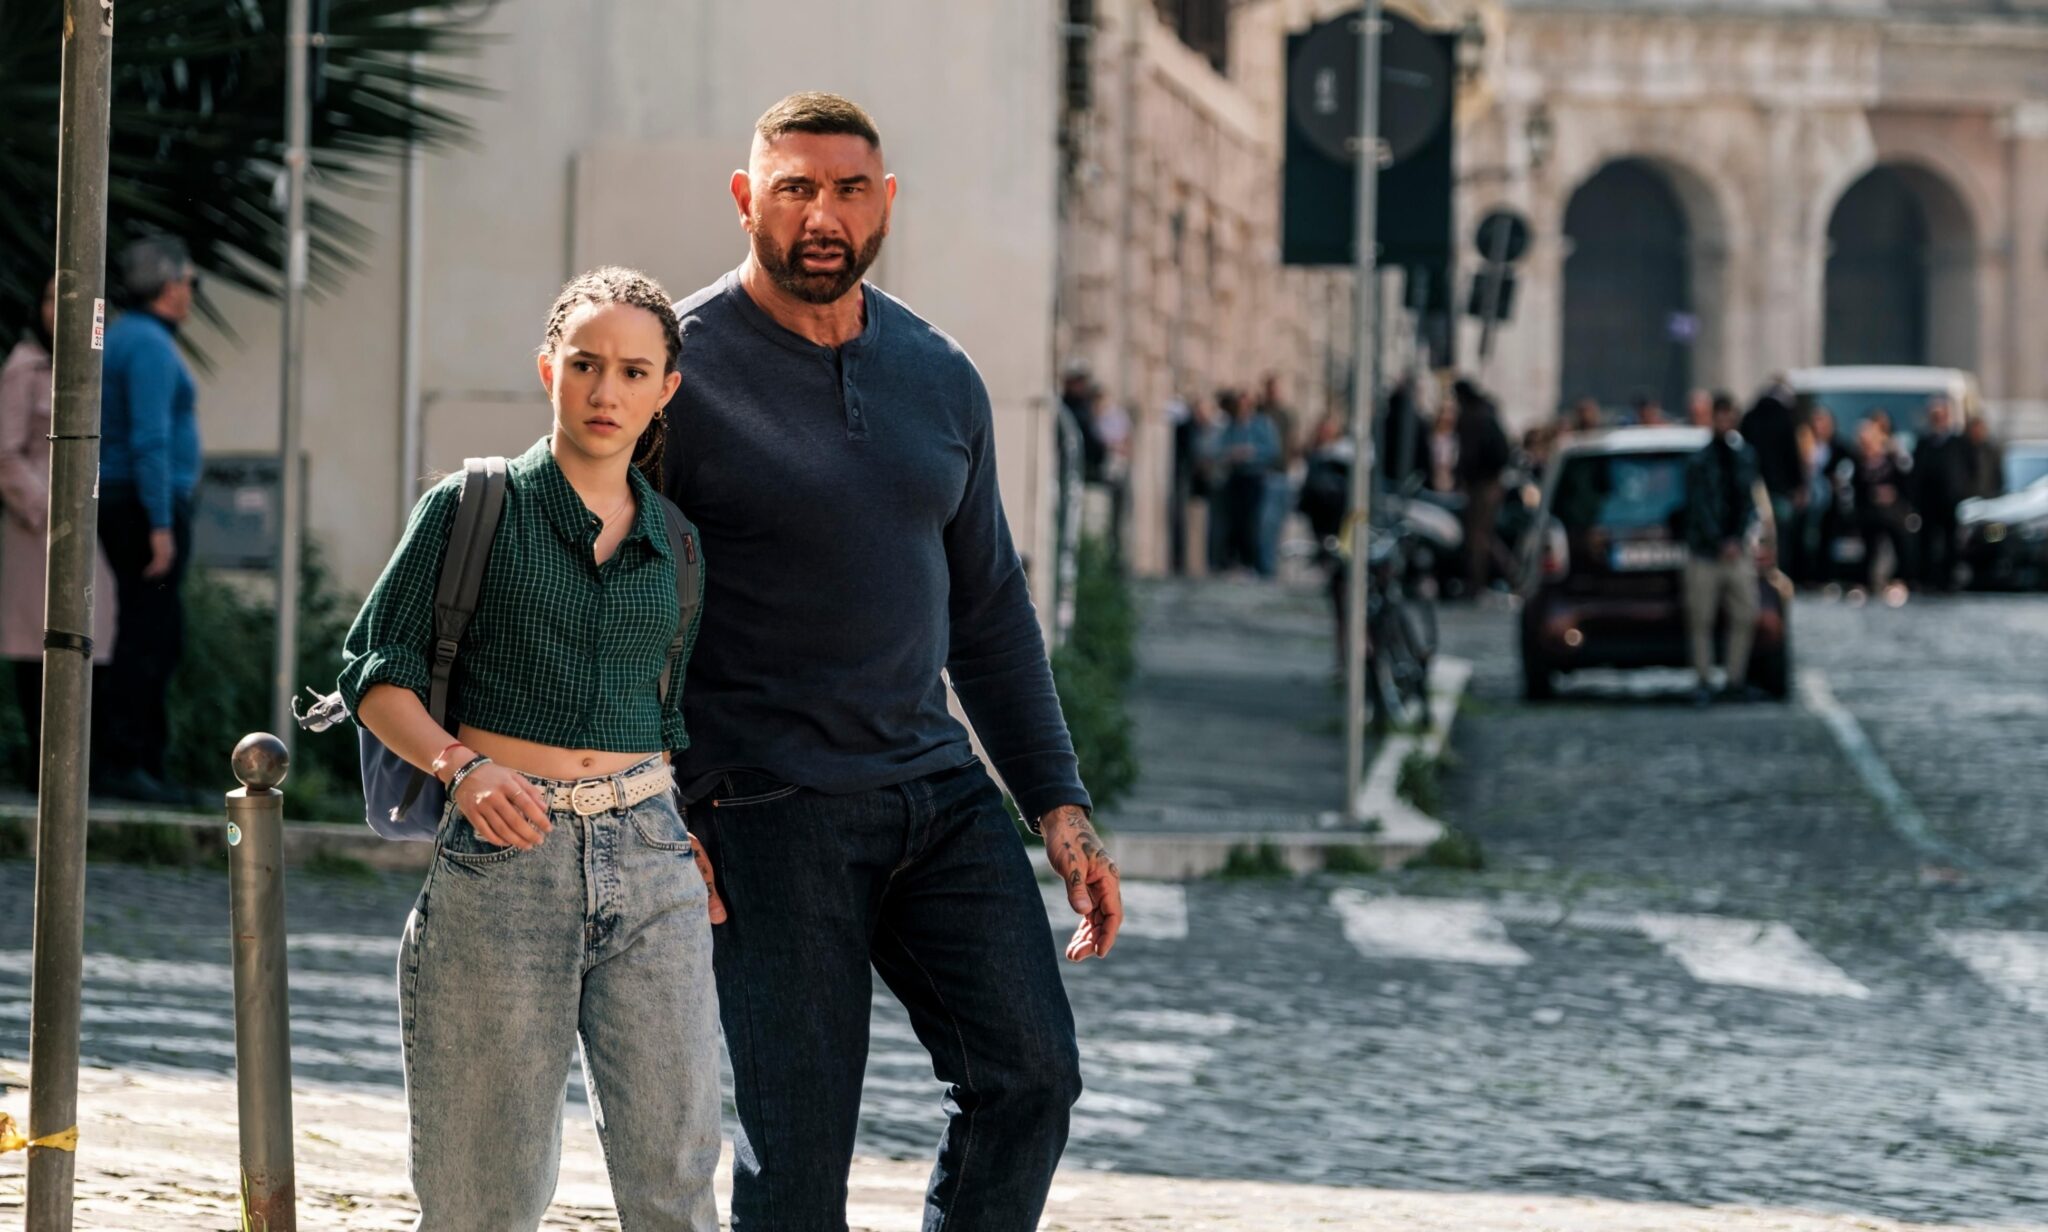 ‘The Eternal City: My Spy’ featuring Dave Bautista is Set to Release Tomorrow